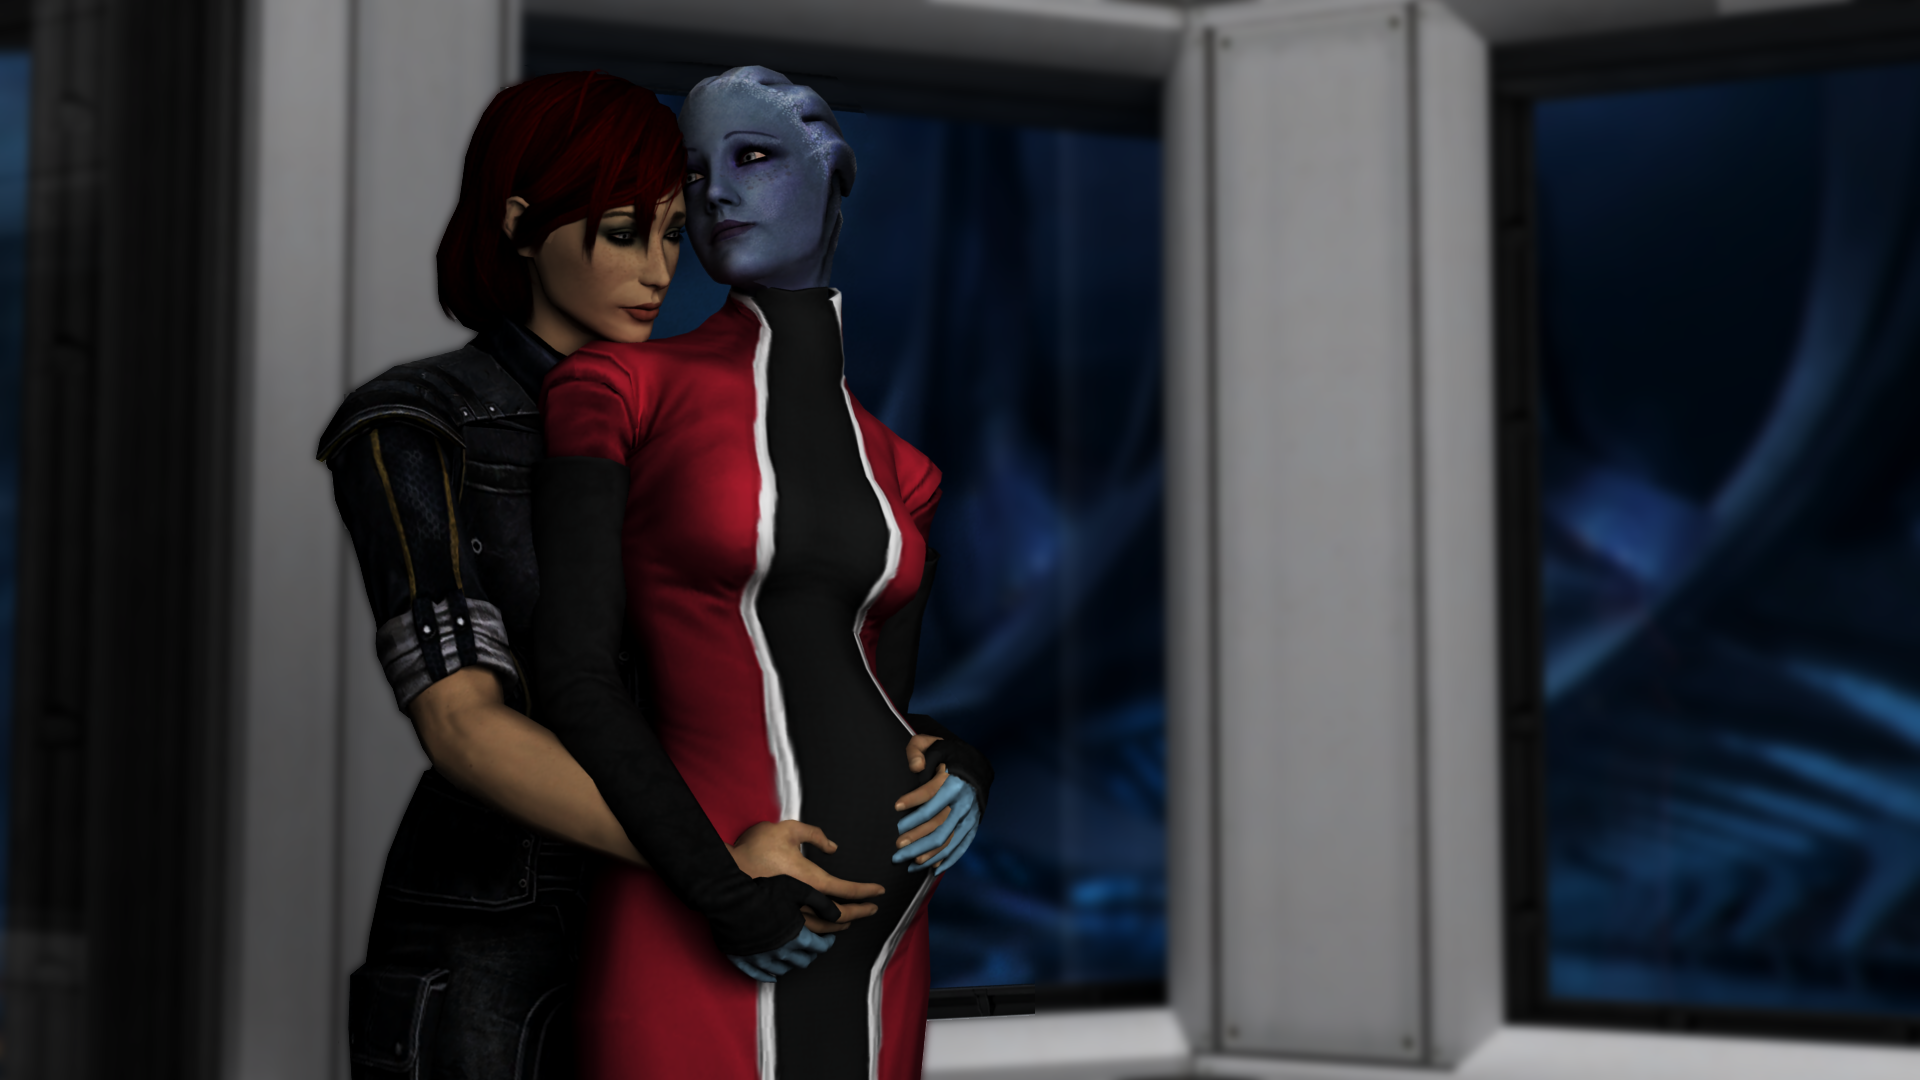 a_shepard_and_liara_legacy_by_neehs-d4t2gwf.png